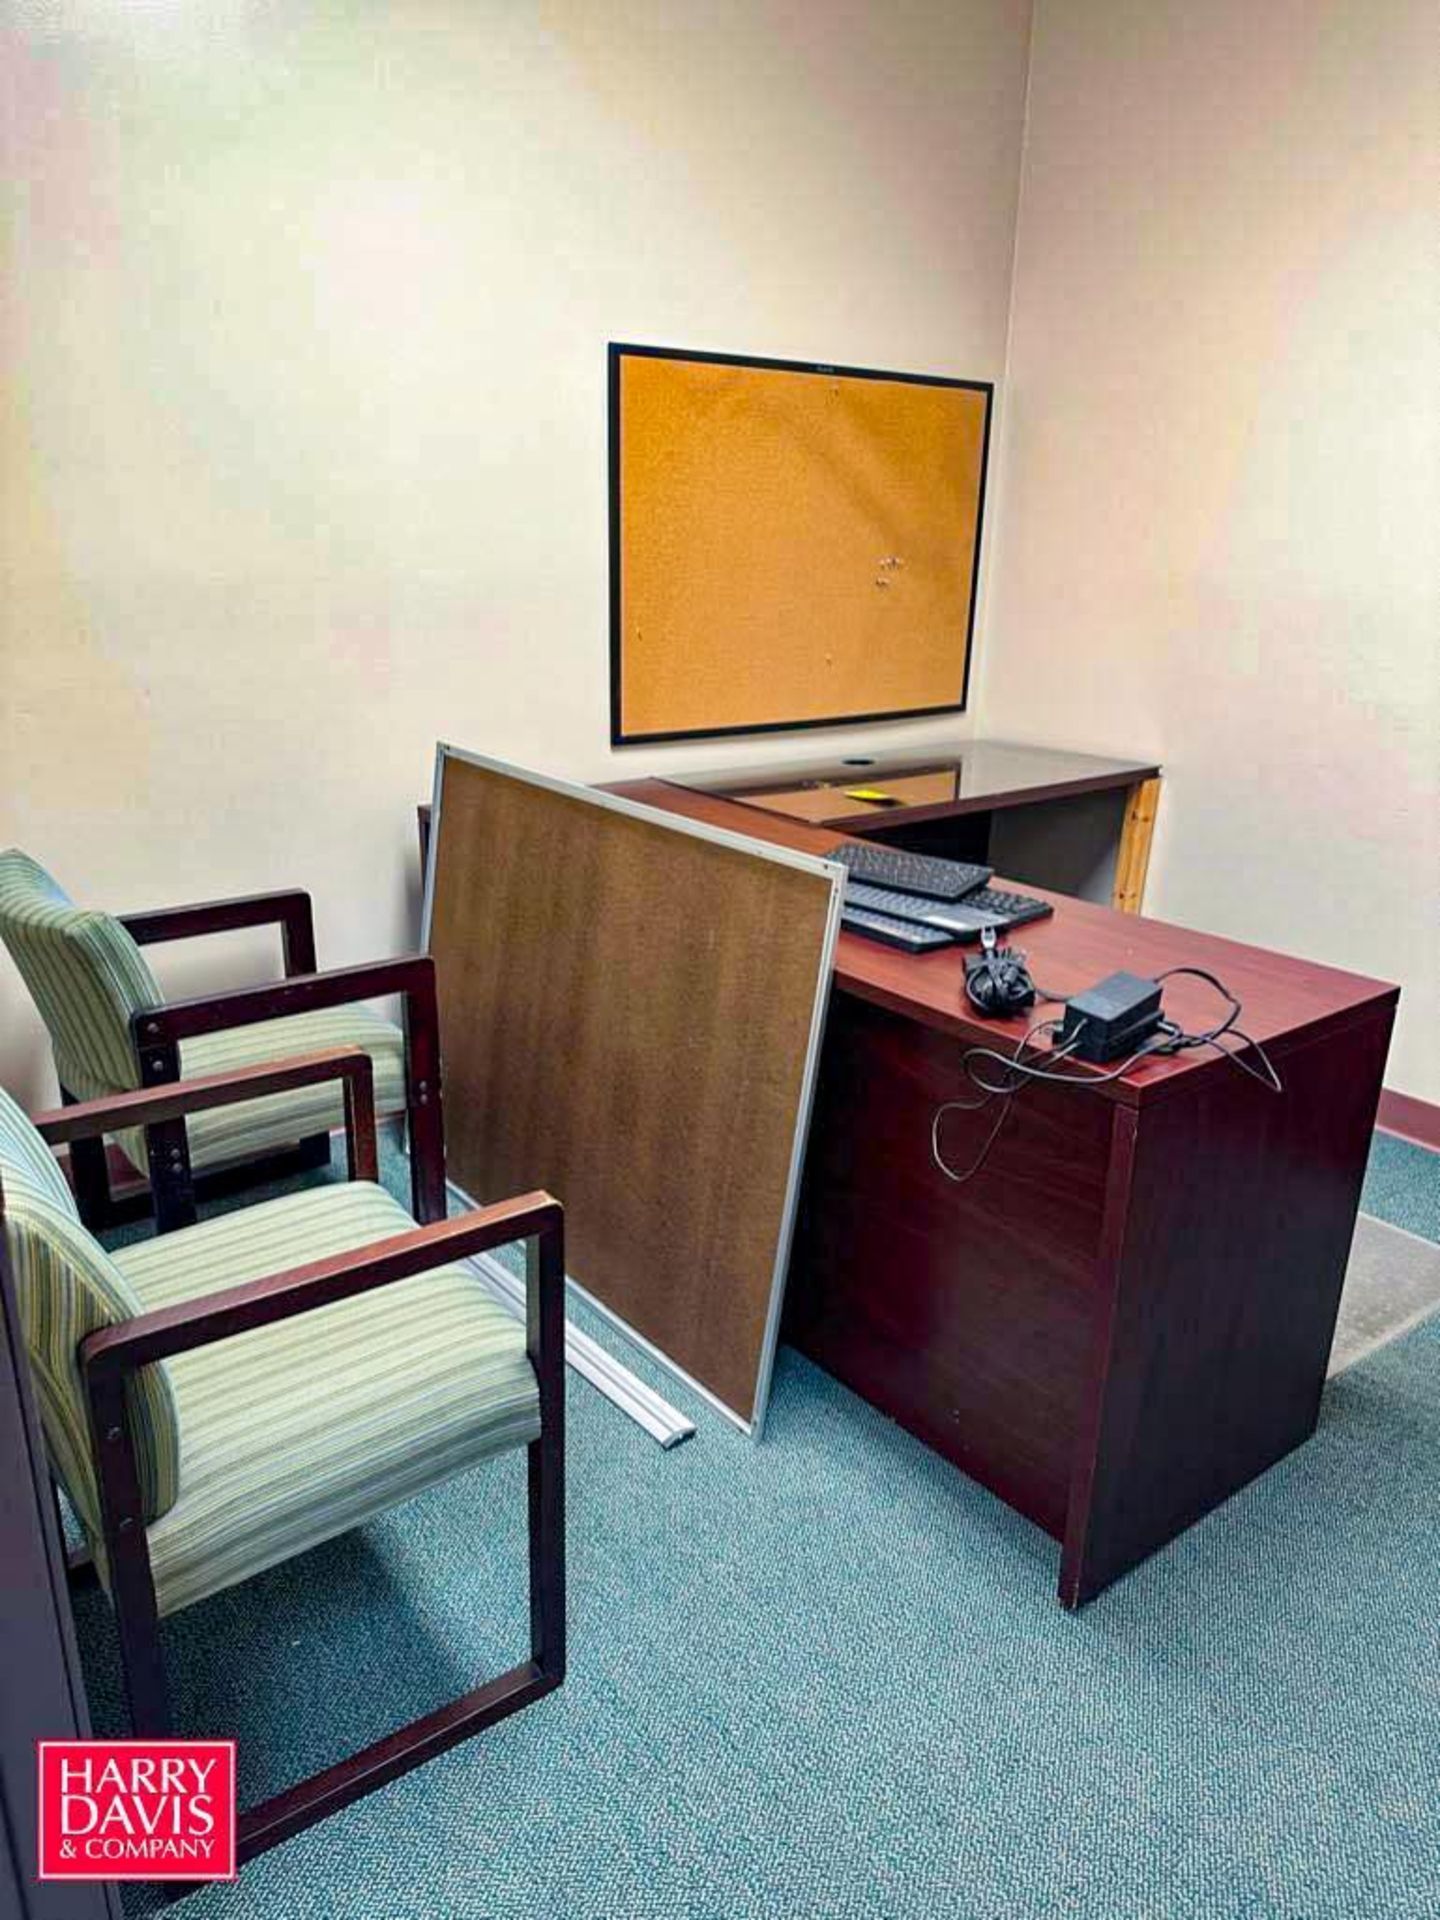 L-Shaped Desk, 2-Chairs, Lateral File Cabinet, Side Table and White Board - Rigging Fee: $450 - Image 2 of 2